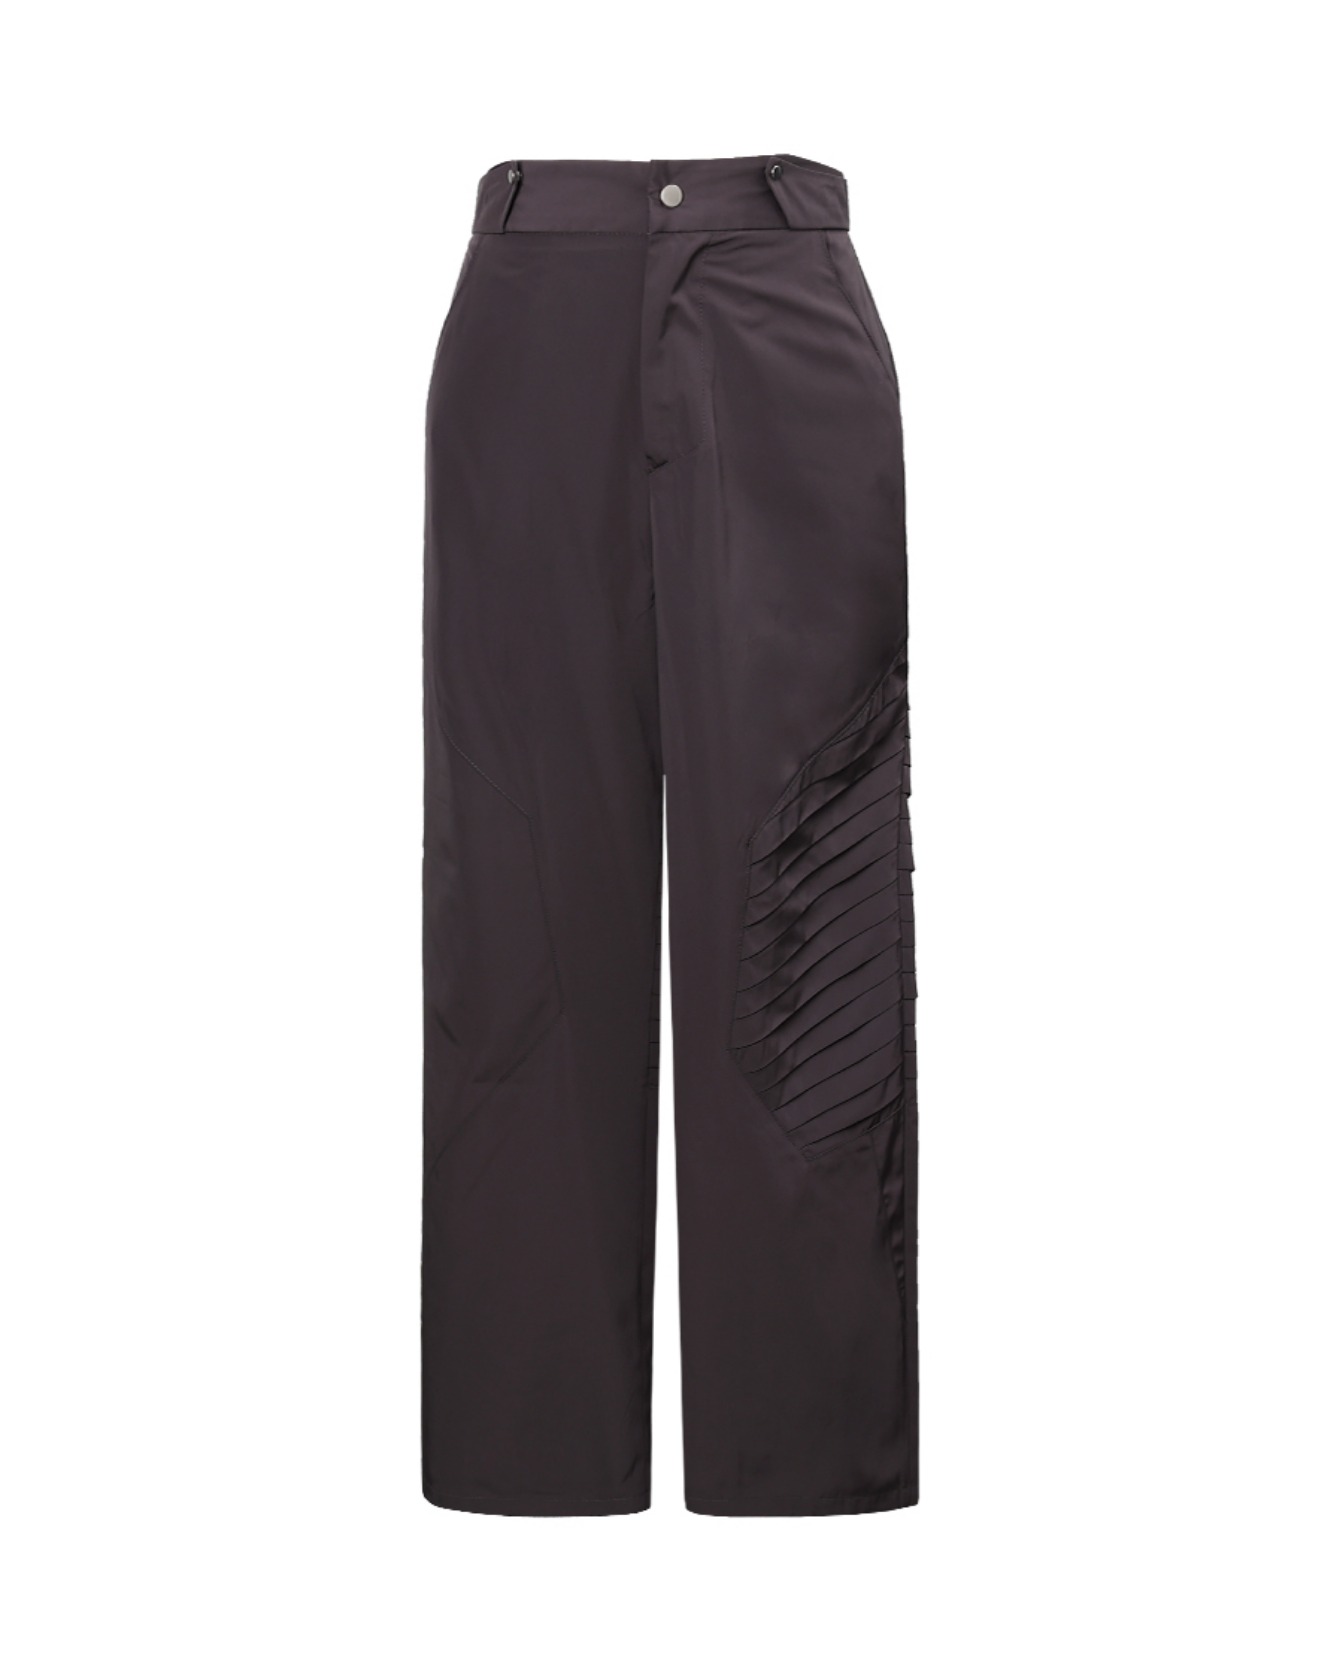 (I)   FUTURE TROUSERS   (BROWN)